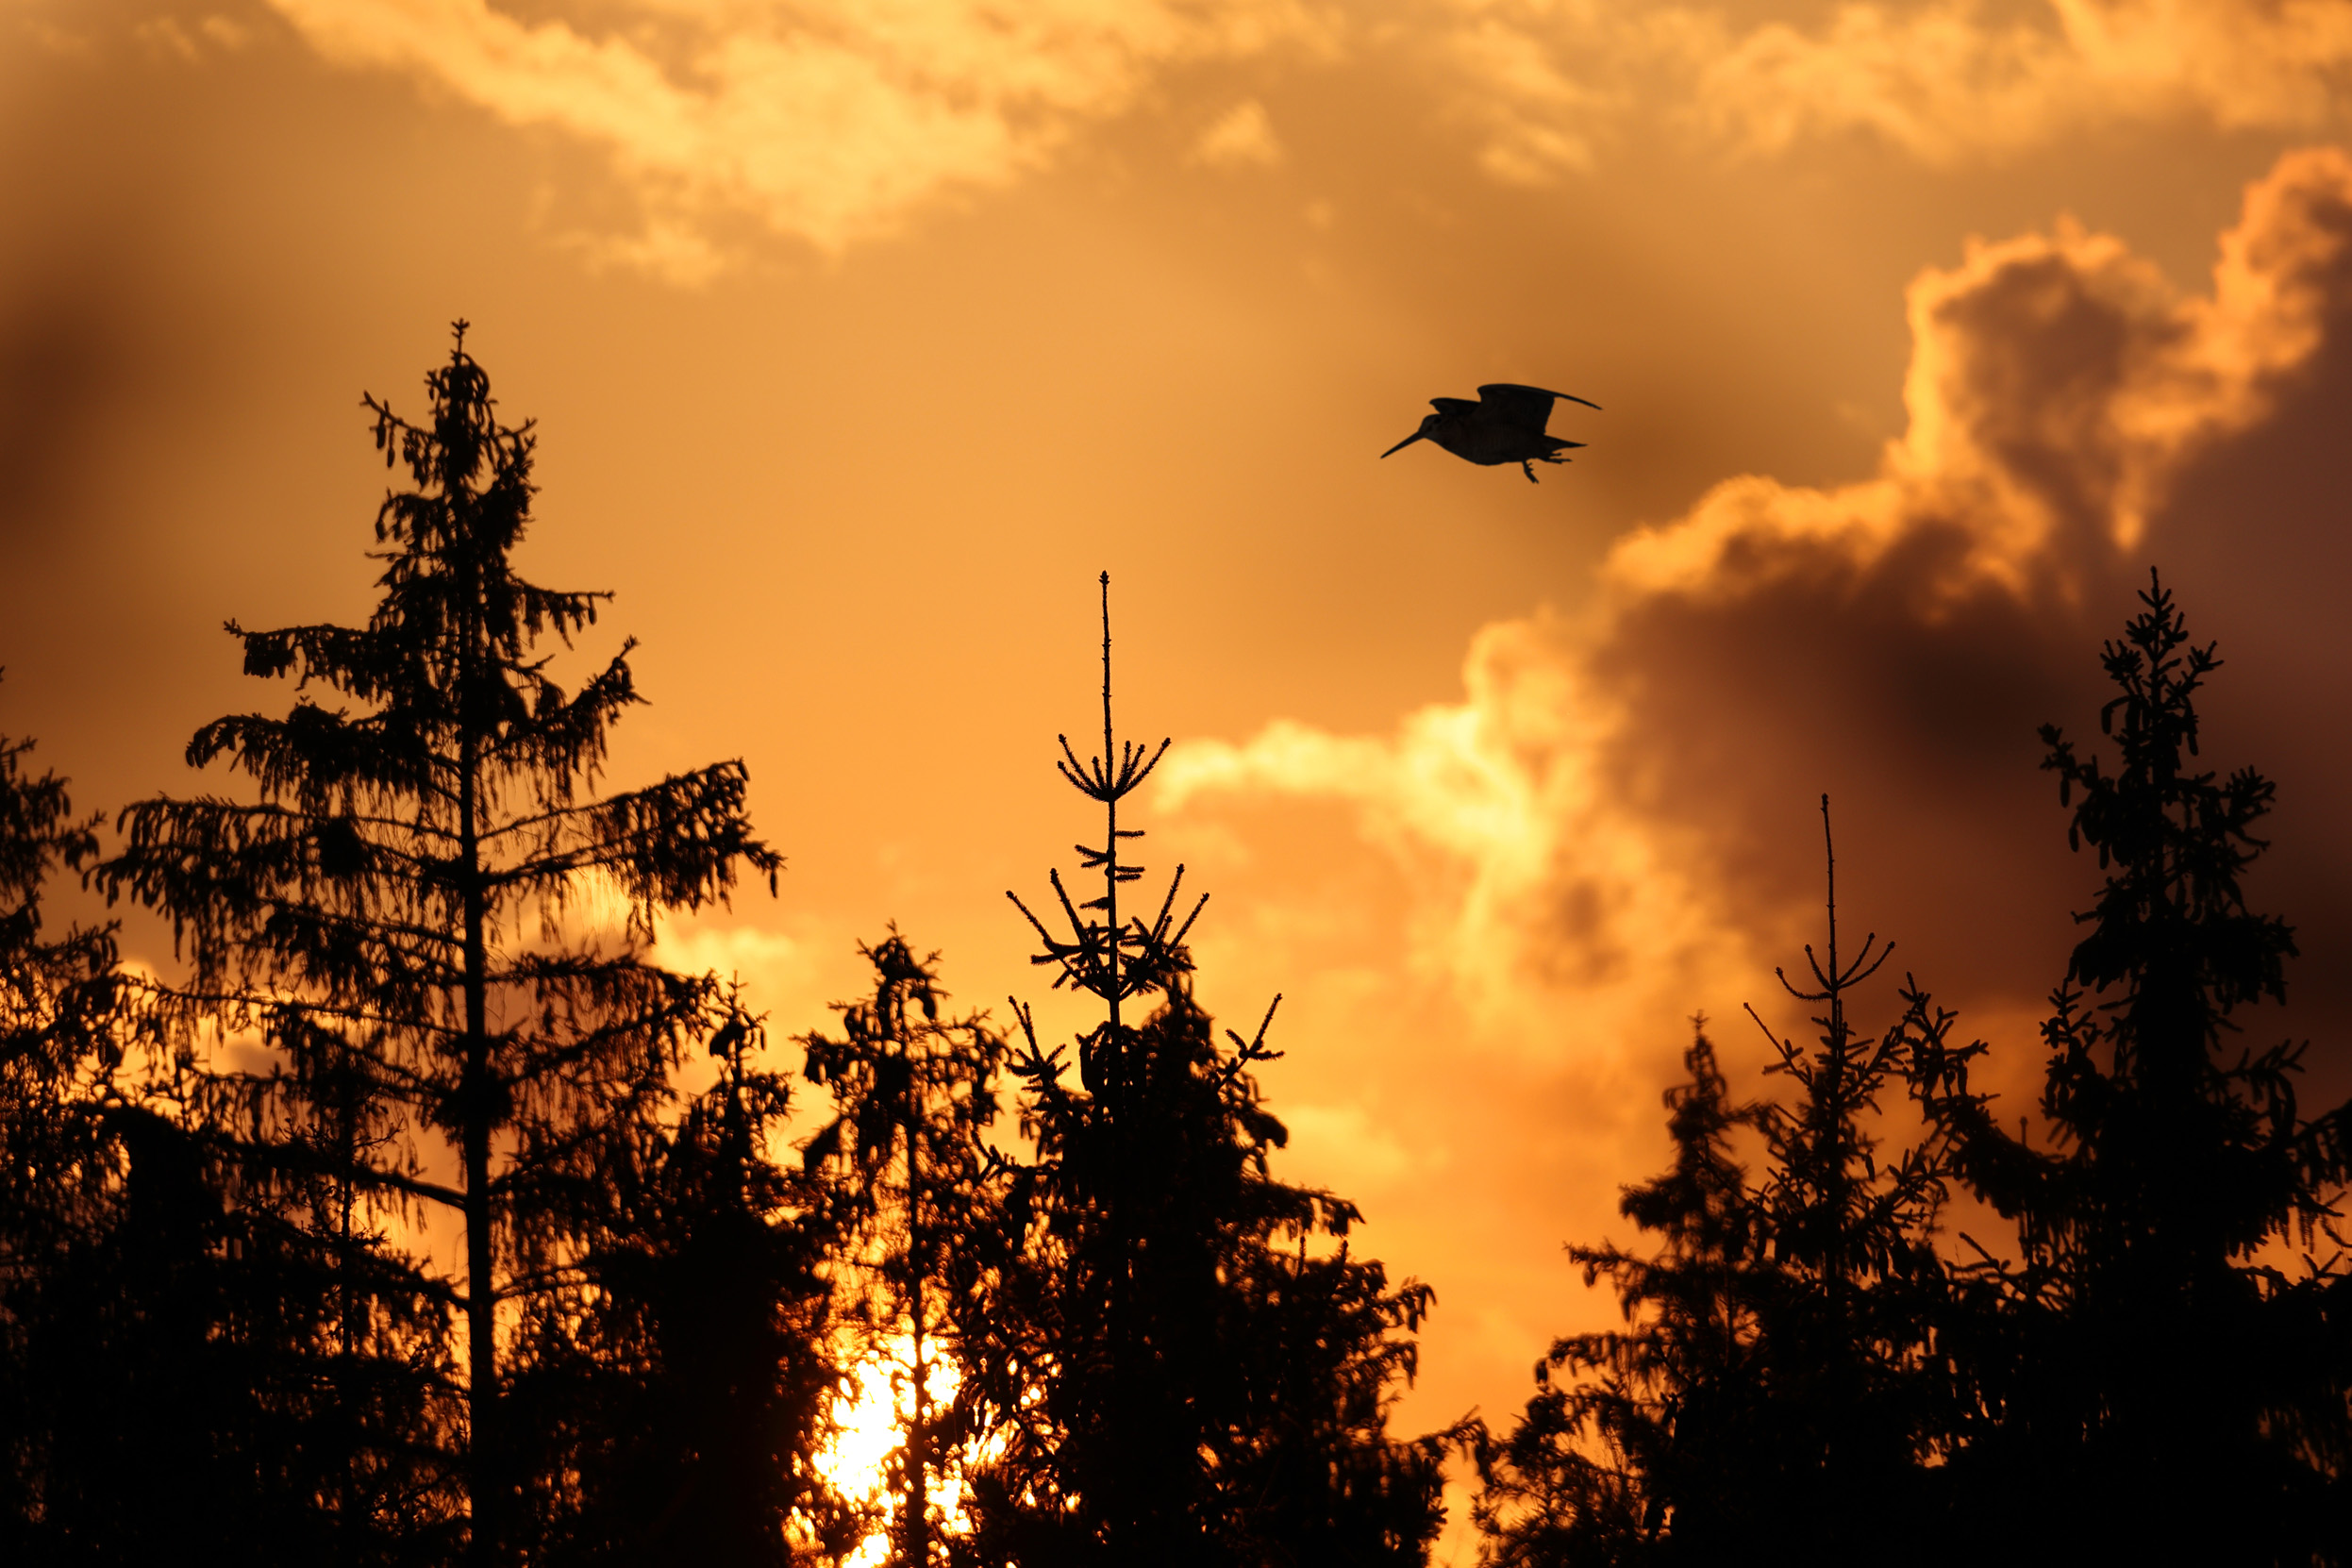 A lone Woodcock flying overhead in a golden sunset.